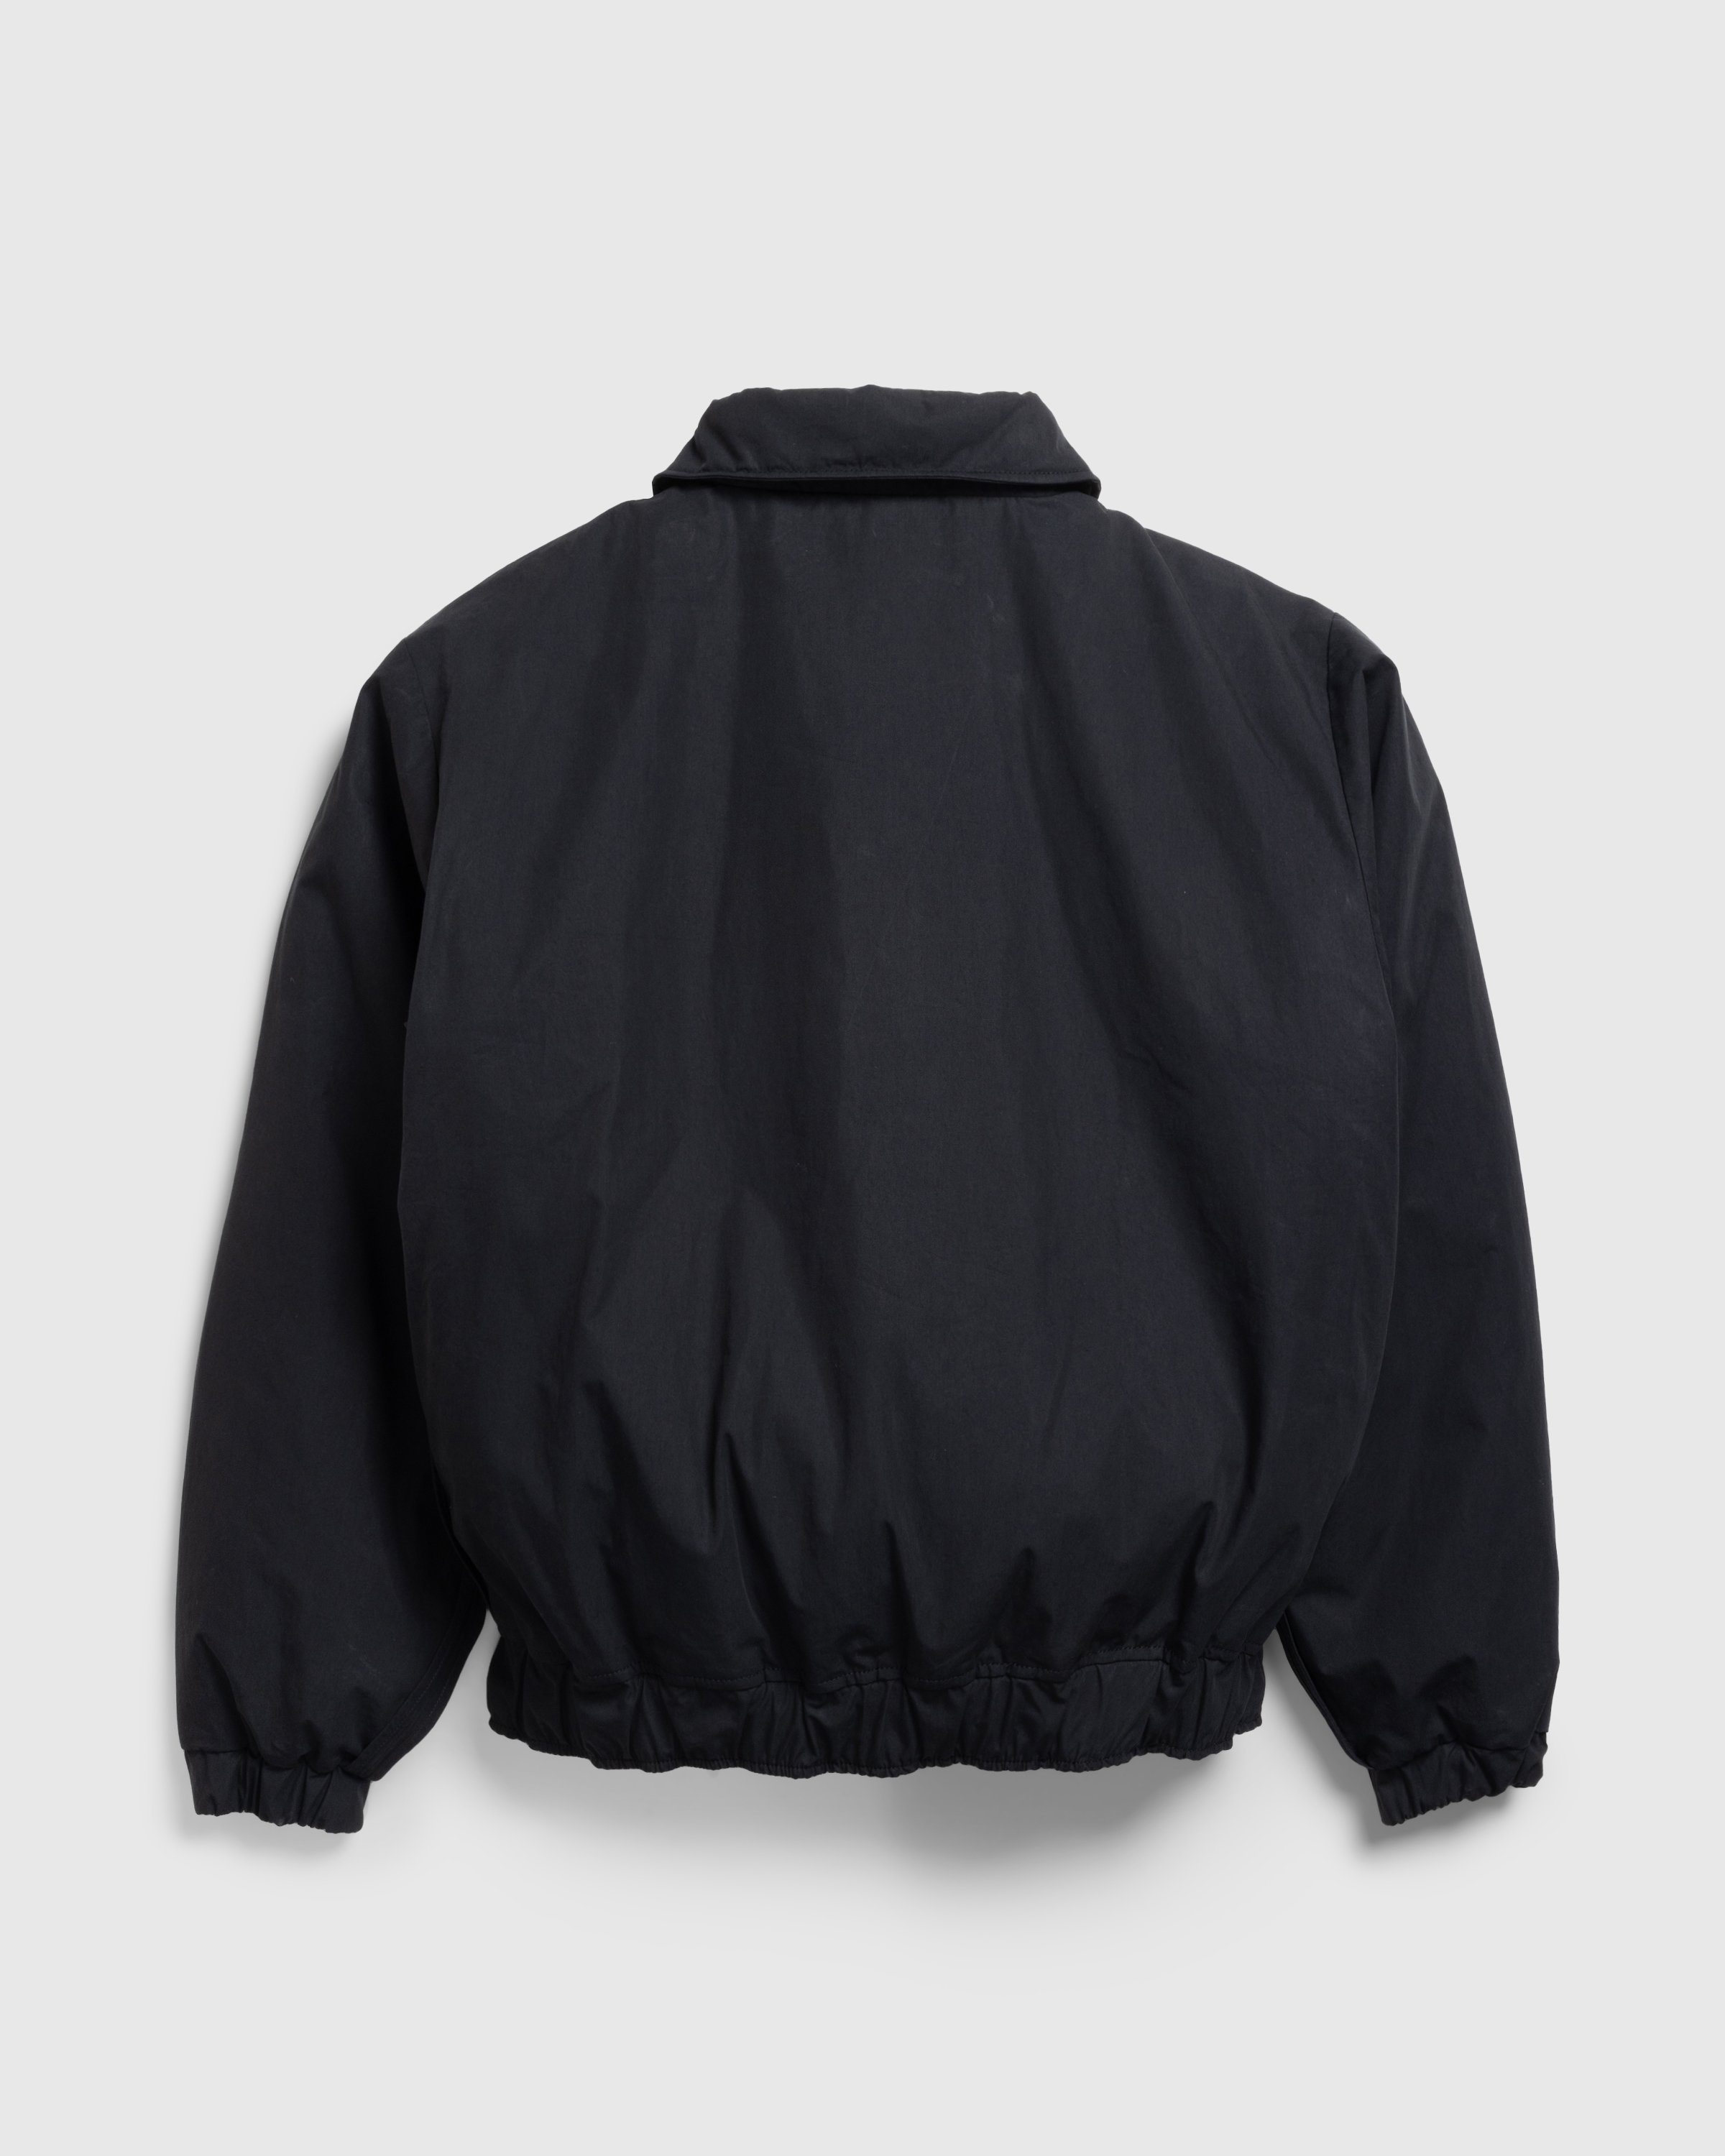 Highsnobiety HS05 - Reverse Piping Insulated Bomber - Clothing - Black - Image 2